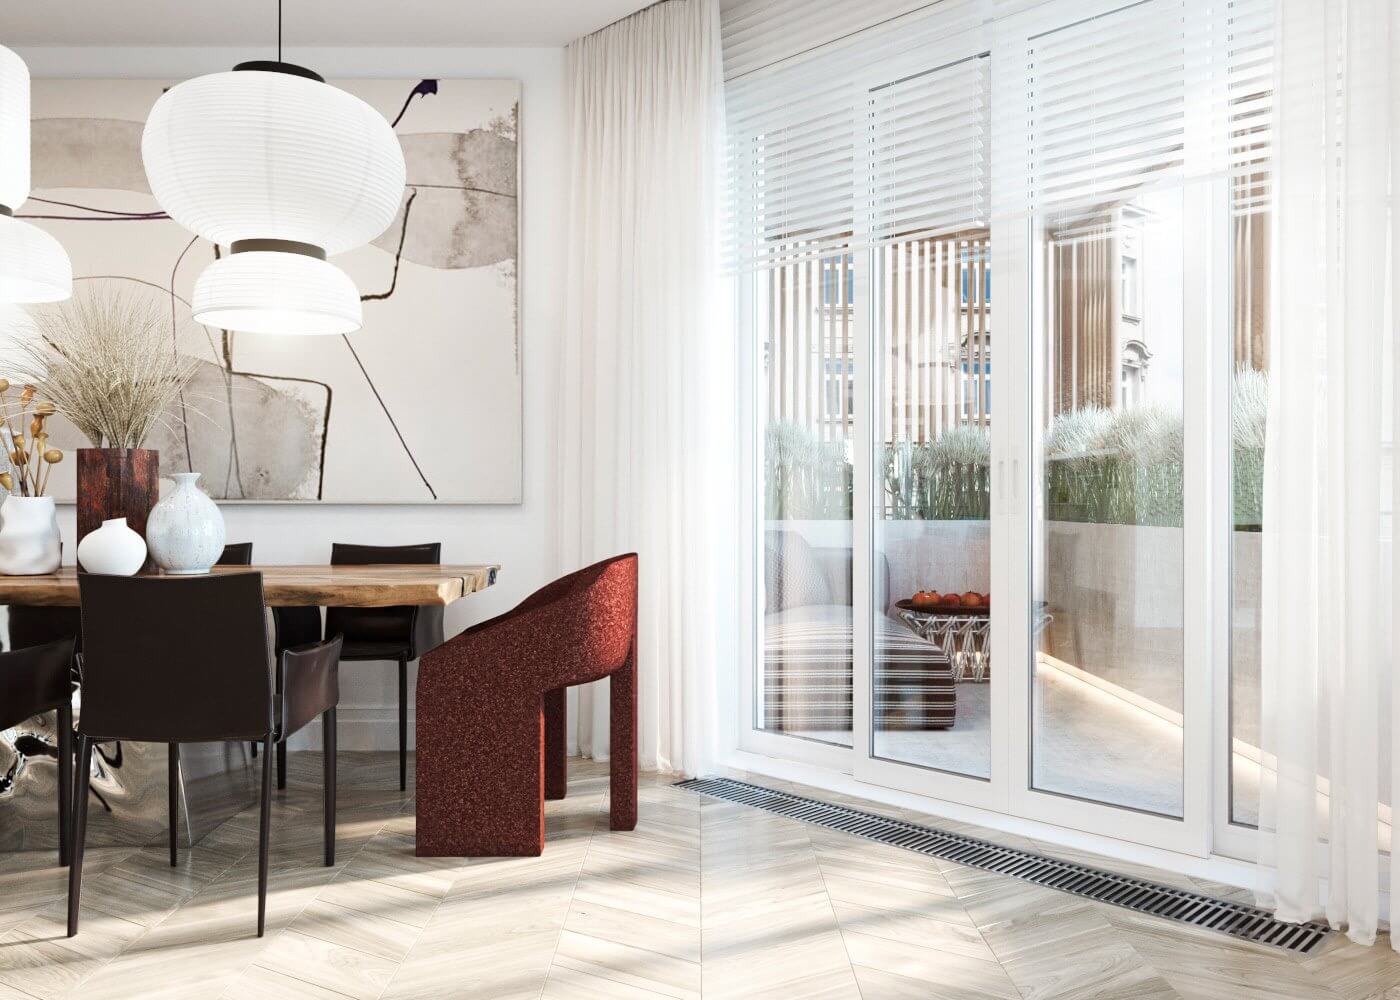 Apartment for a young family dining room terrace - cgi visualization